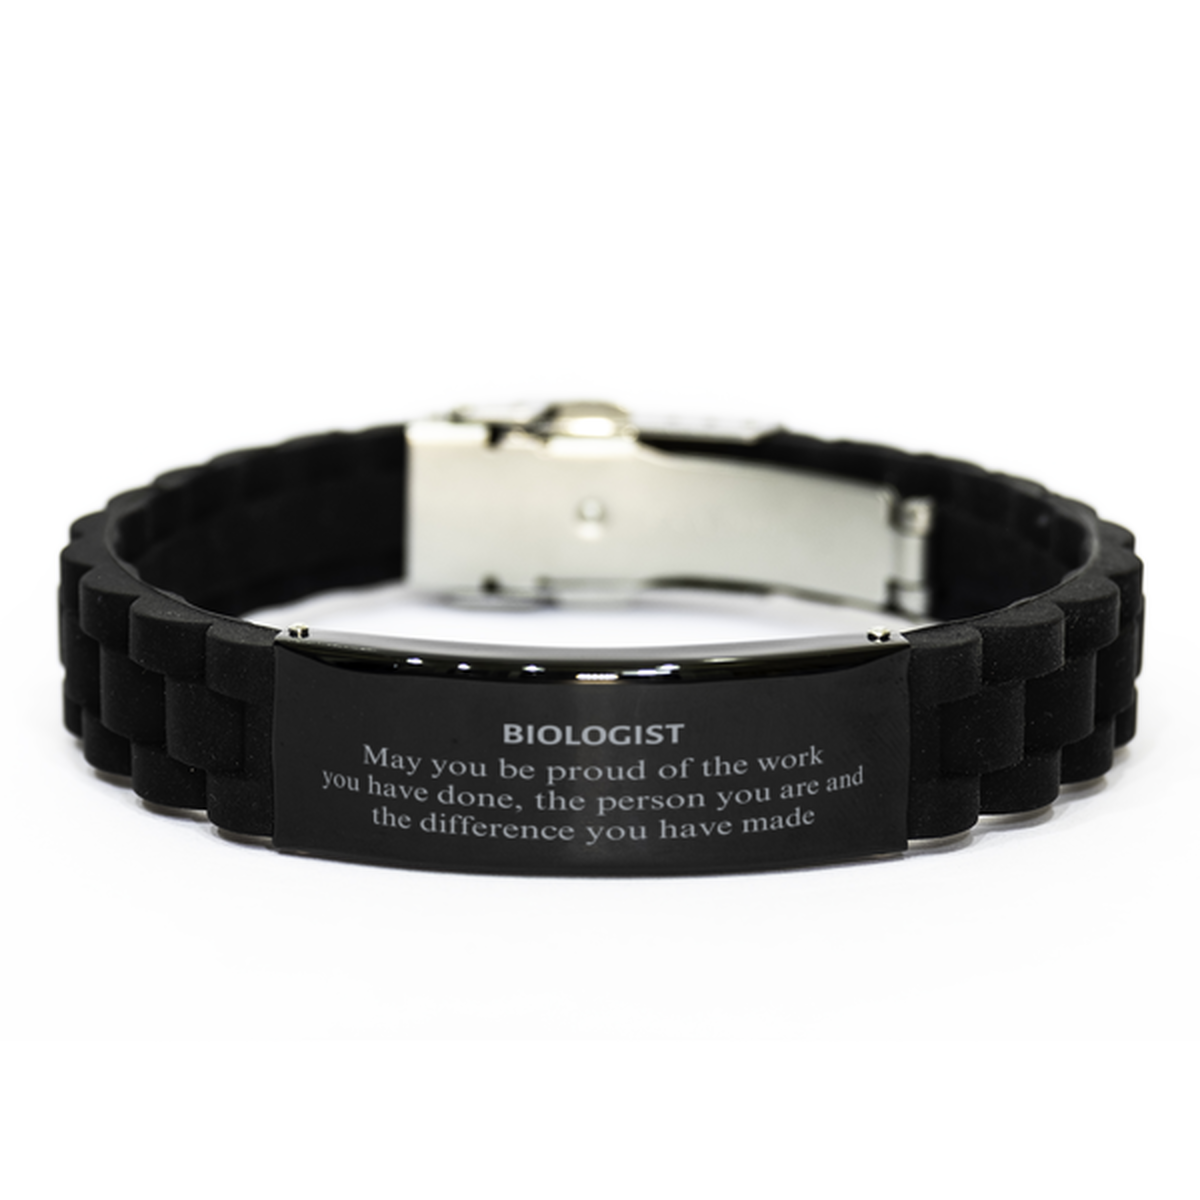 Biologist May you be proud of the work you have done, Retirement Biologist Black Glidelock Clasp Bracelet for Colleague Appreciation Gifts Amazing for Biologist